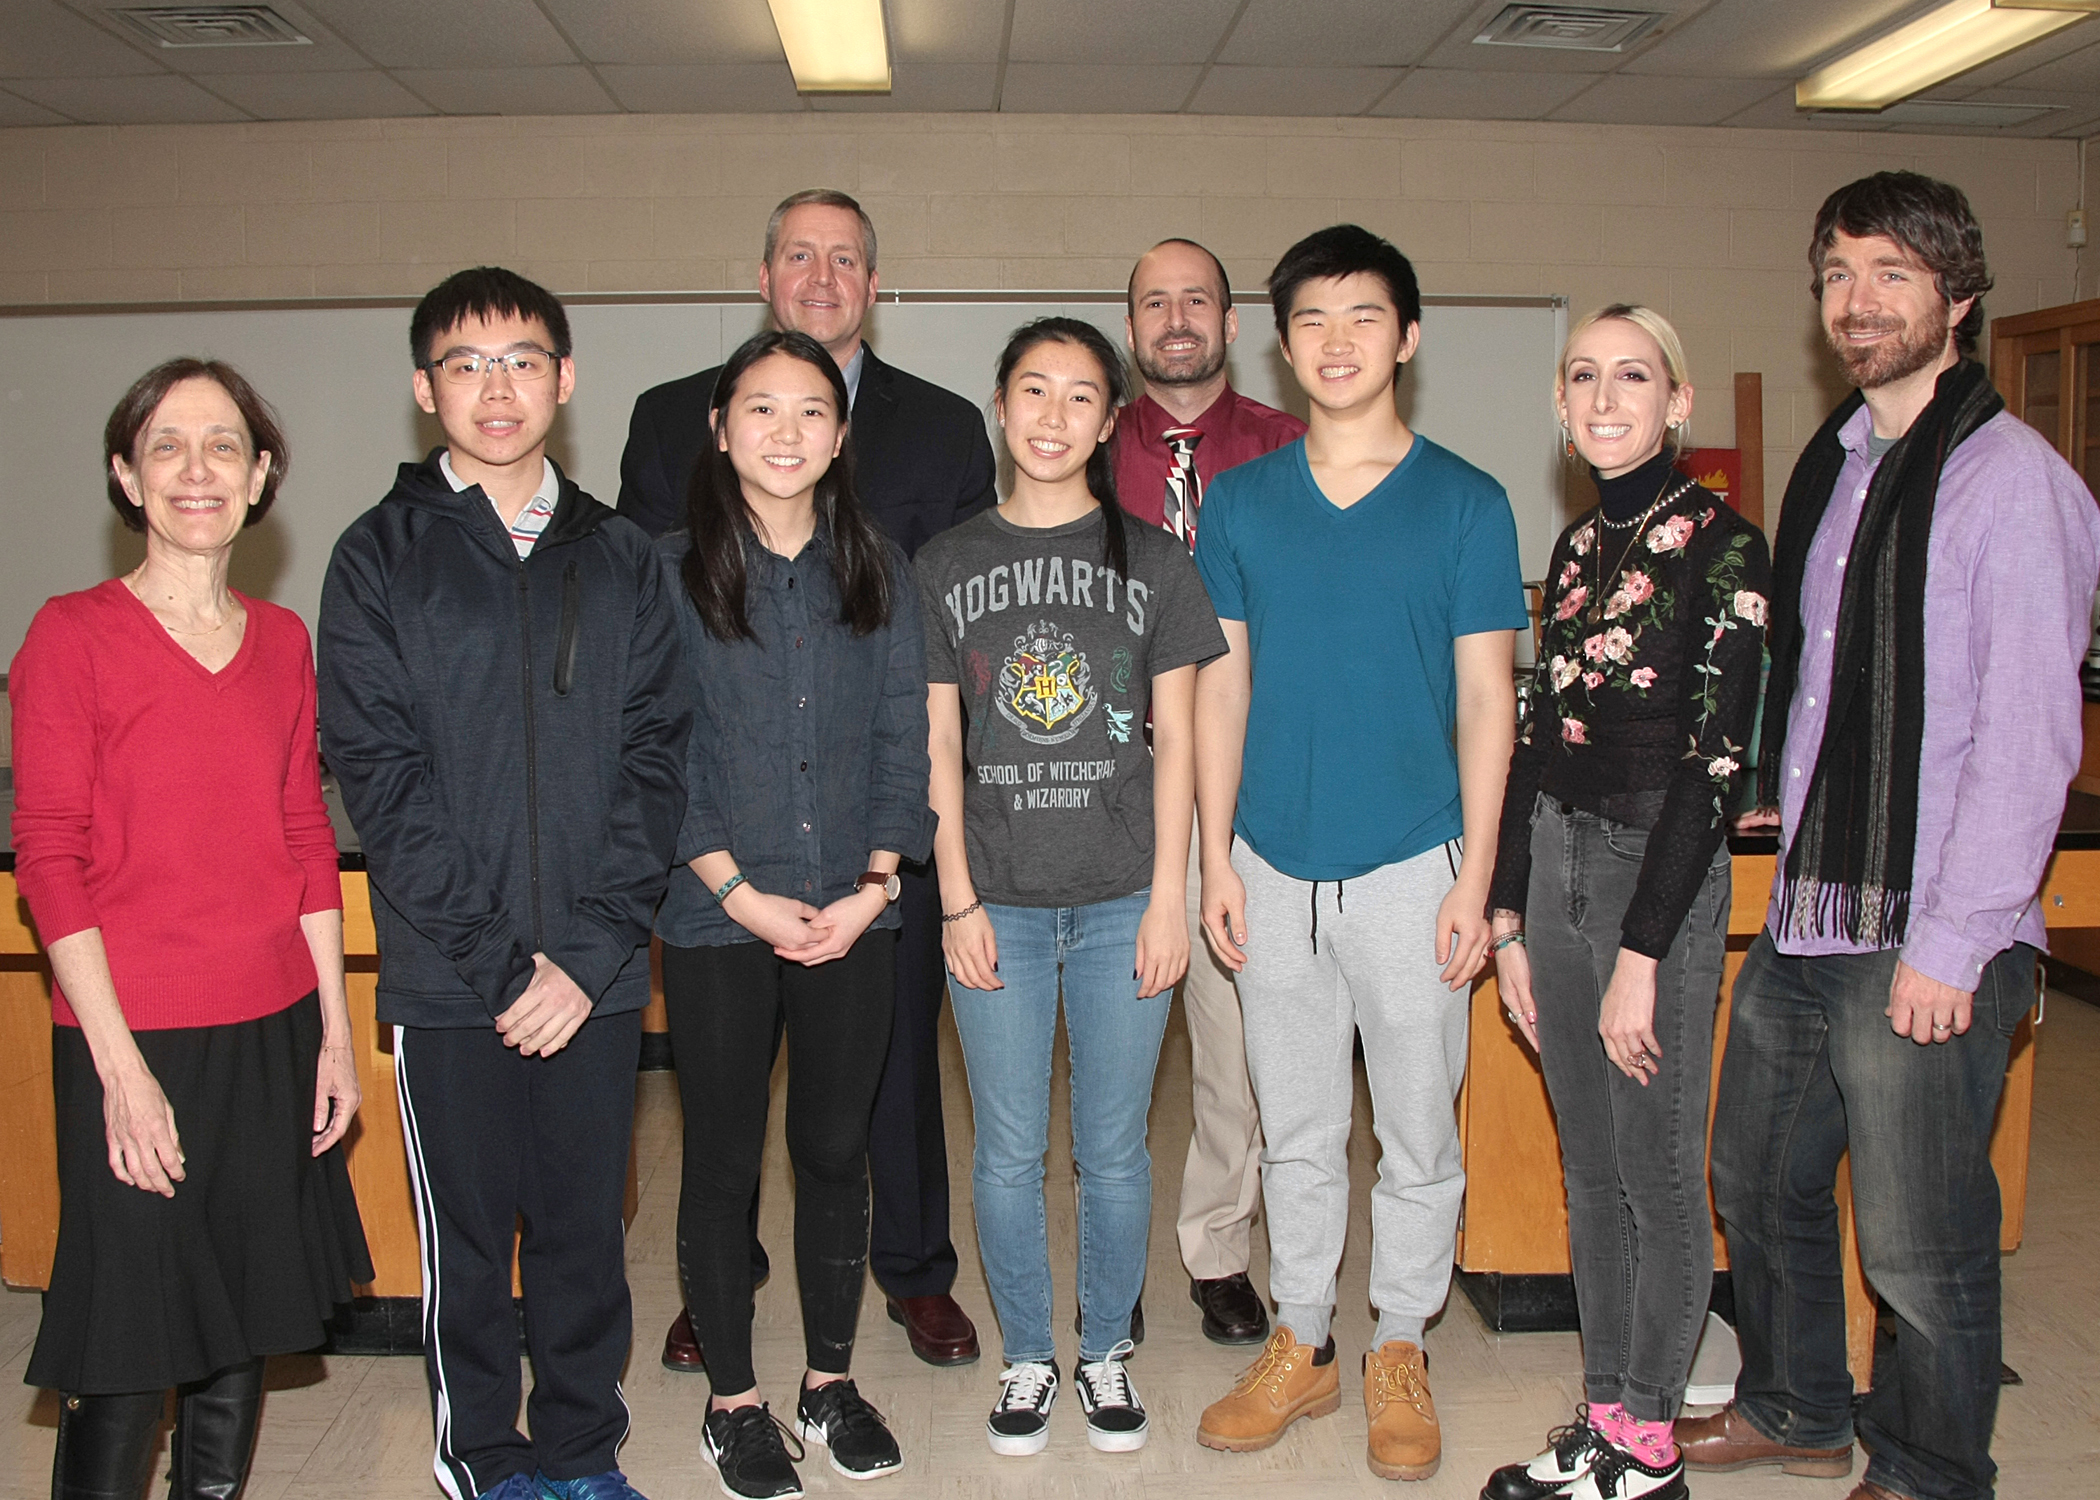 South High Regeneron Scholars Eric Kuang, Michelle Xing, Cindy Wang and Daniel Kim are joined by science research teacher Dr. Carol Hersh, Principal Dr. Christopher Gitz, Science Department Chair Bradley Krauz, and science research teachers Nicole Spanelli and Dr. James Truglio. (Photo courtesy of the Great Neck Public Schools)